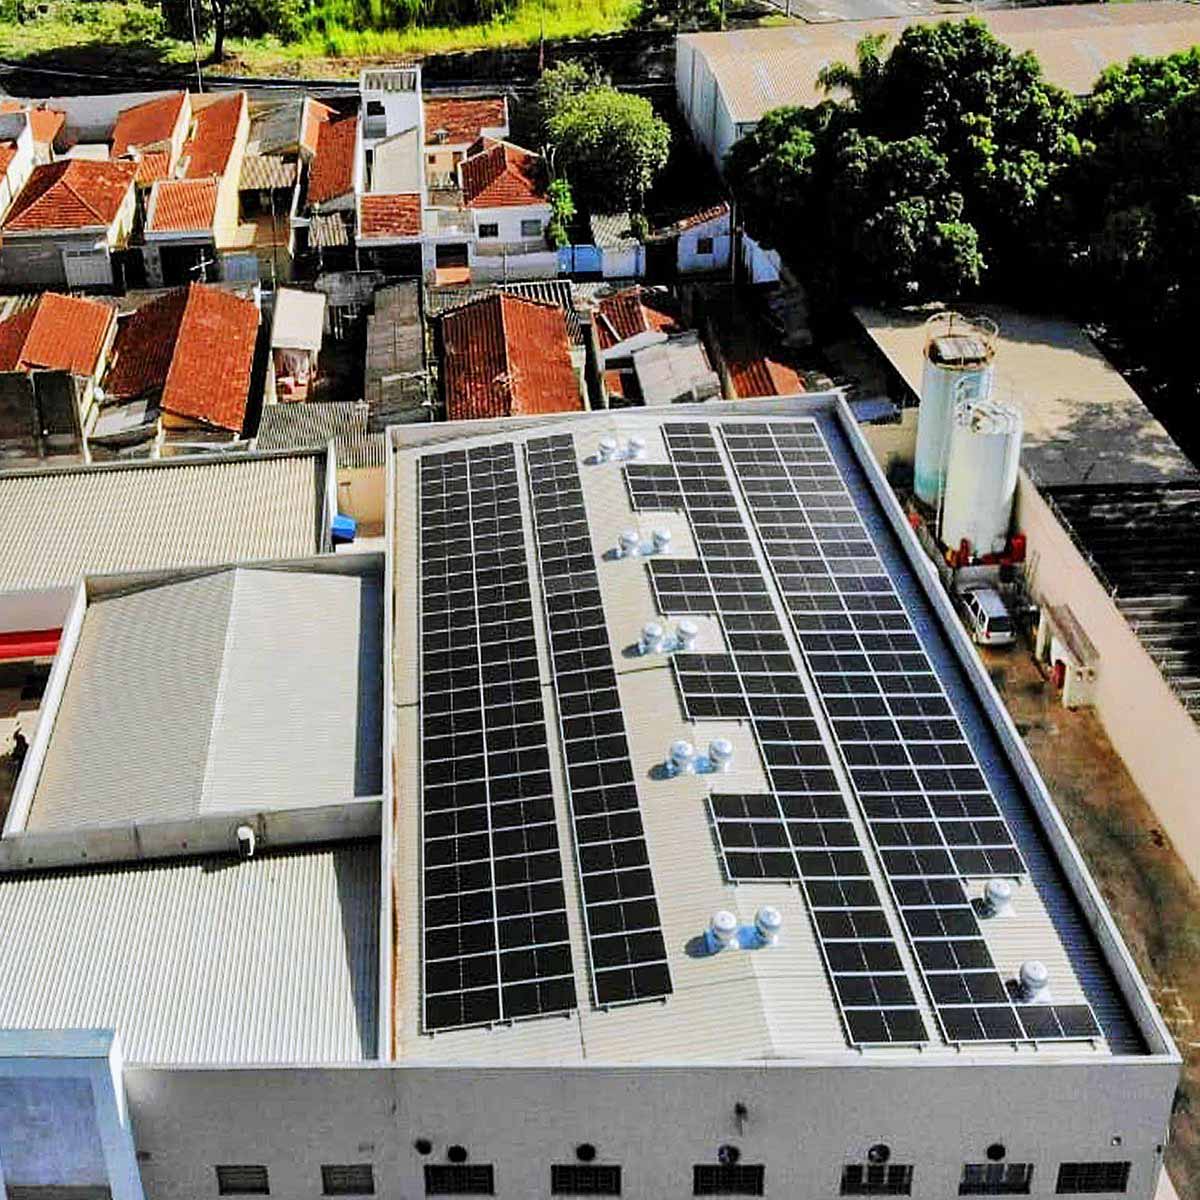 170 PV panels installed on the roof are bringing the total system size to 90.1 kW in Ribeirão Preto-SP, Brazil